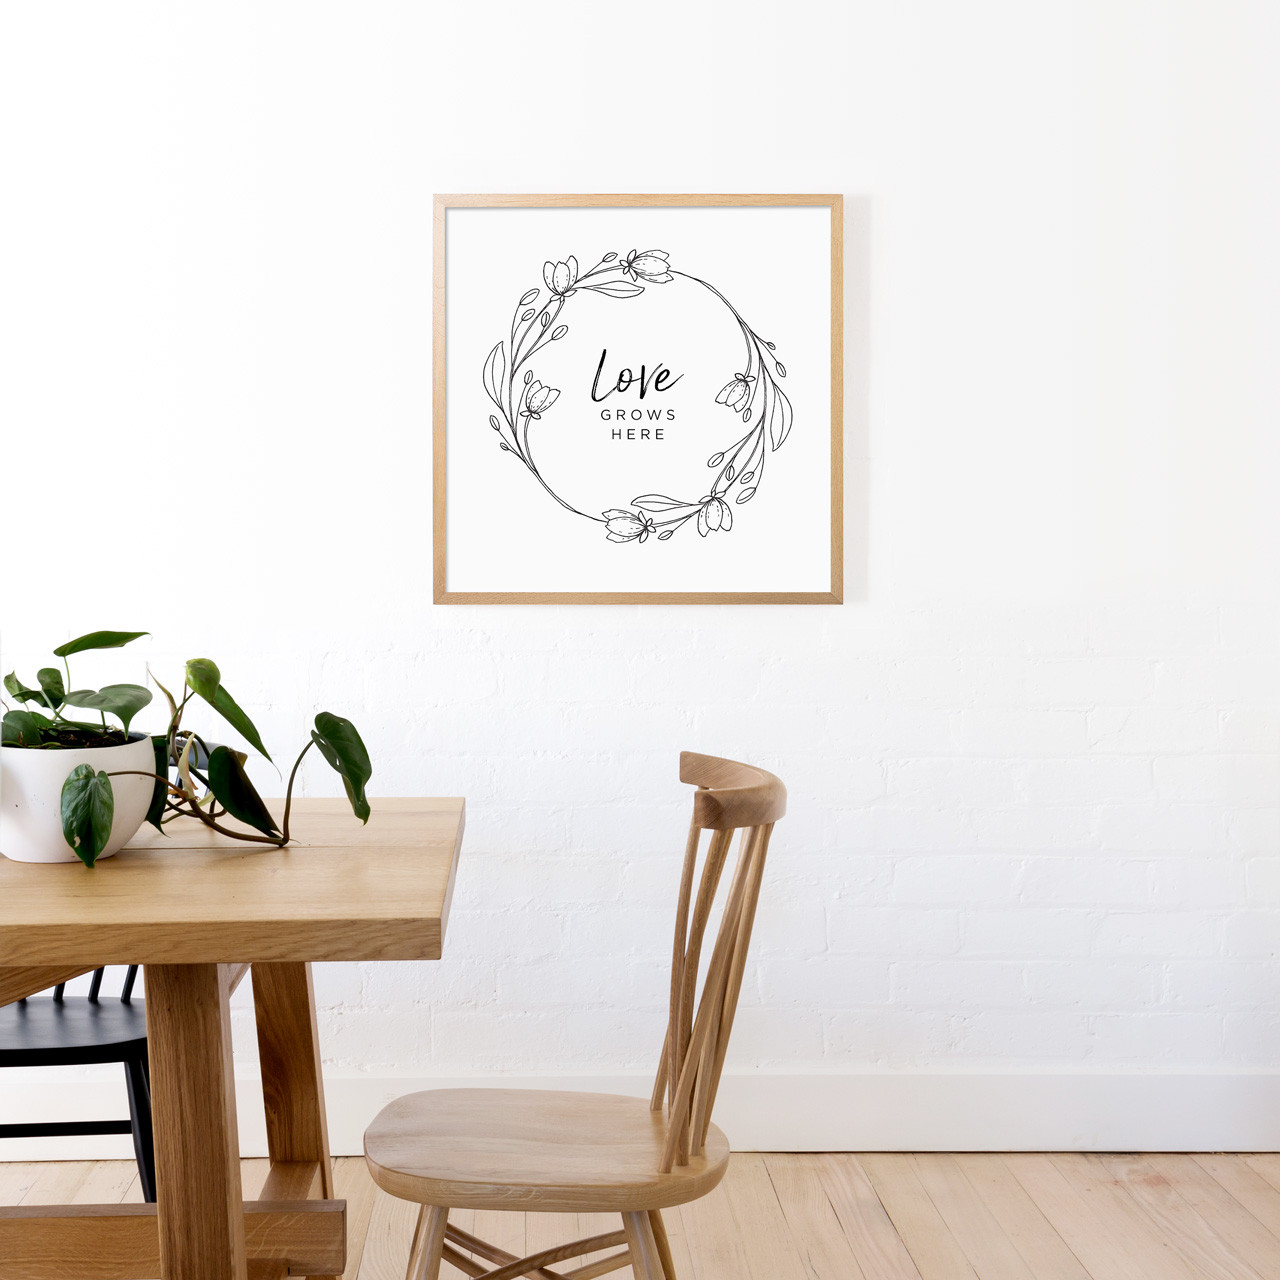 'Love Grows Here' Art Print from The Printed Home